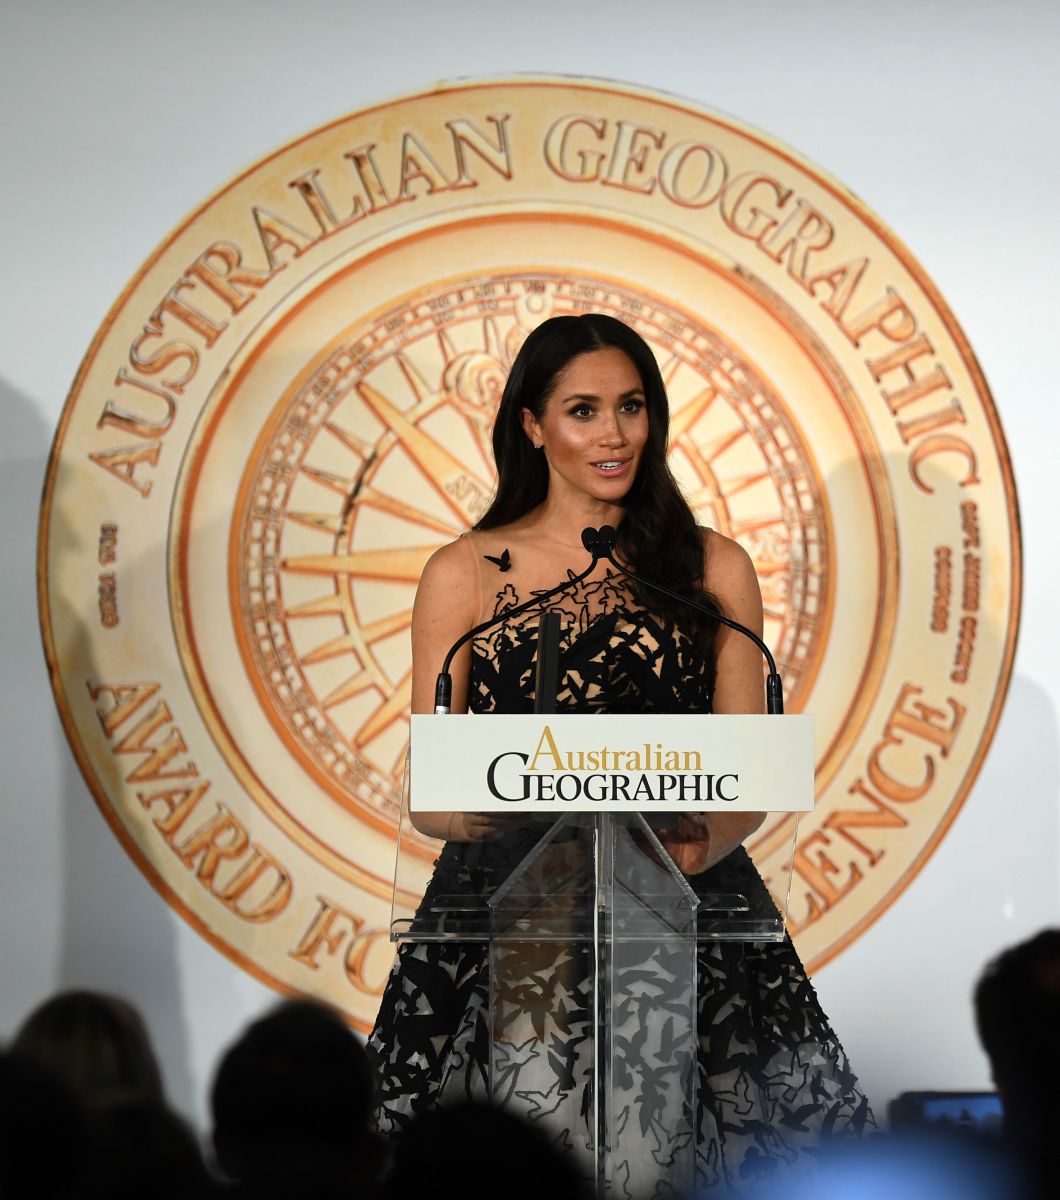 Duchess of Sussex Meghan Markle at the Australian Geographic Society Awards in Sydney on Friday. Photo: Joel Carrett/AFP/Getty Images